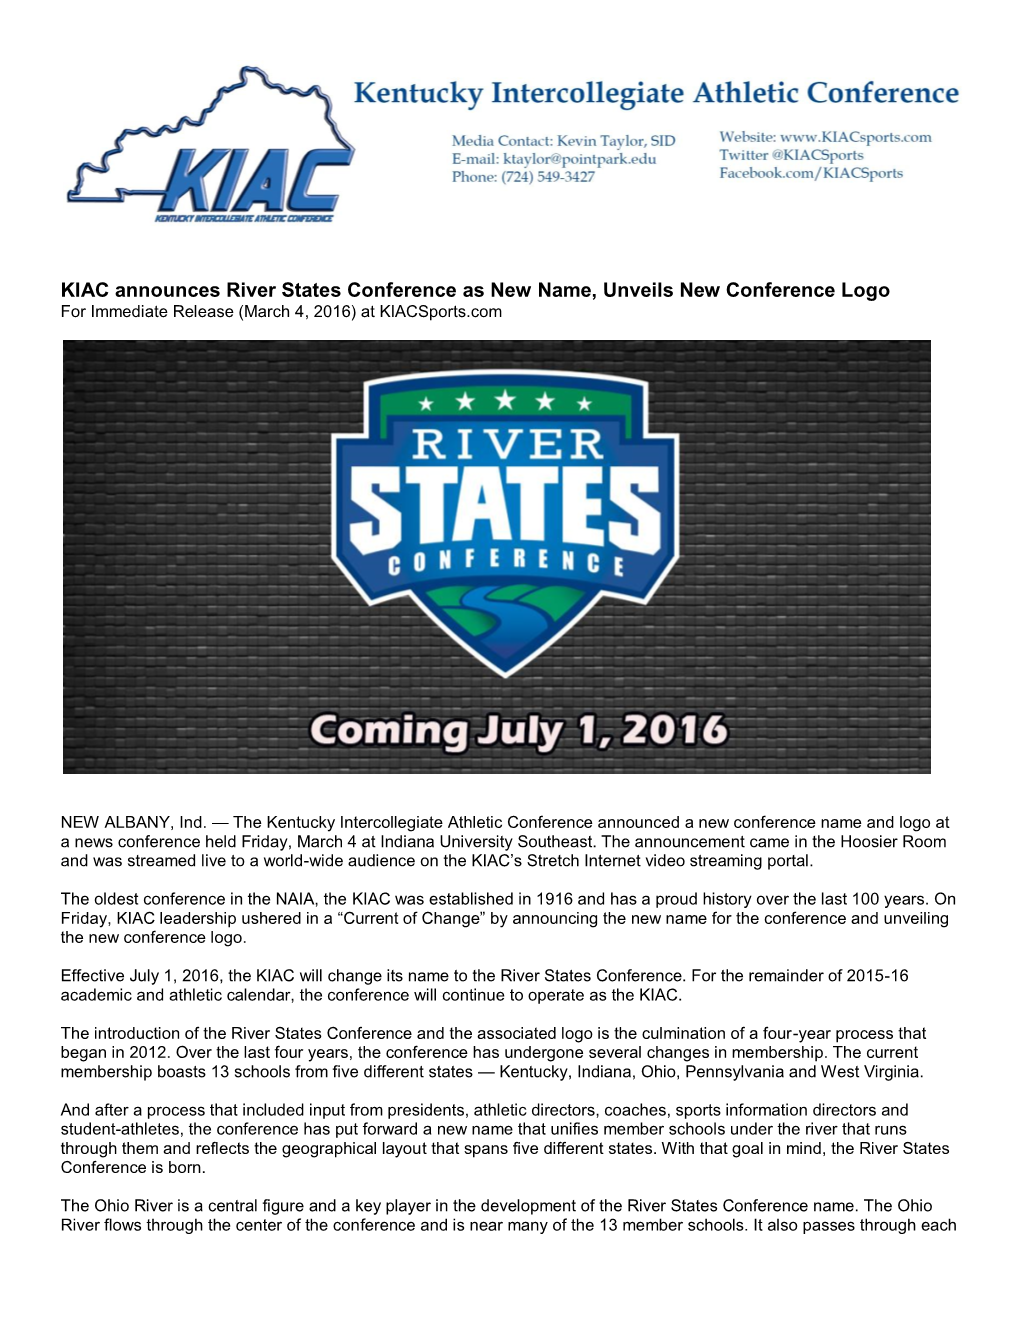 KIAC Announces River States Conference As New Name, Unveils New Conference Logo for Immediate Release (March 4, 2016) at Kiacsports.Com